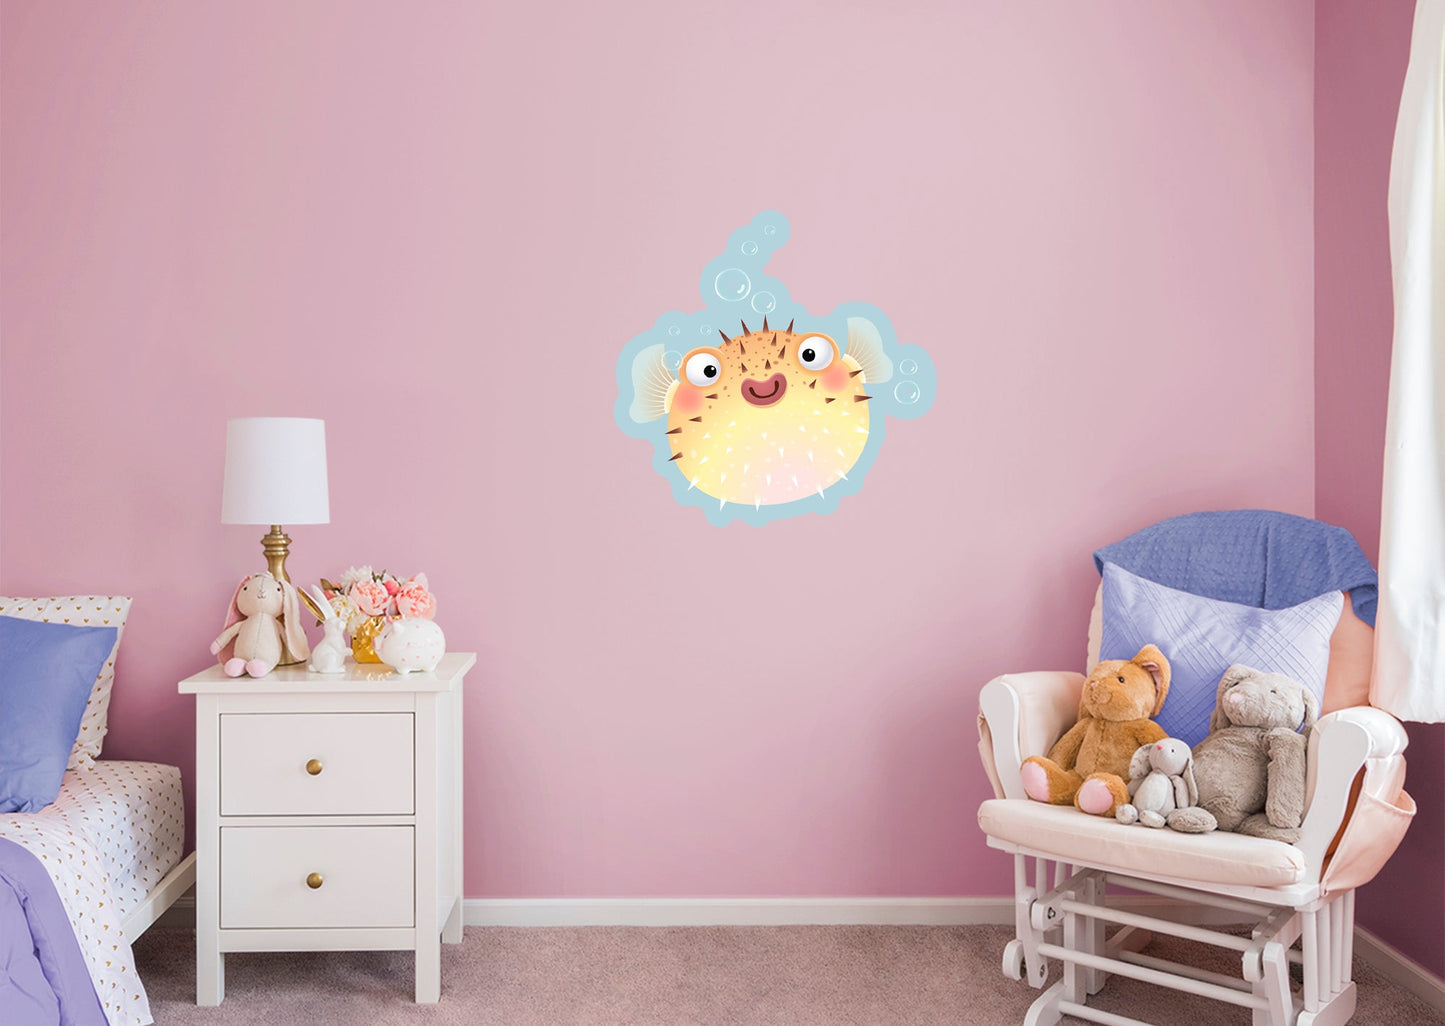 Nursery:  Spiky Creature Icon        -   Removable Wall   Adhesive Decal